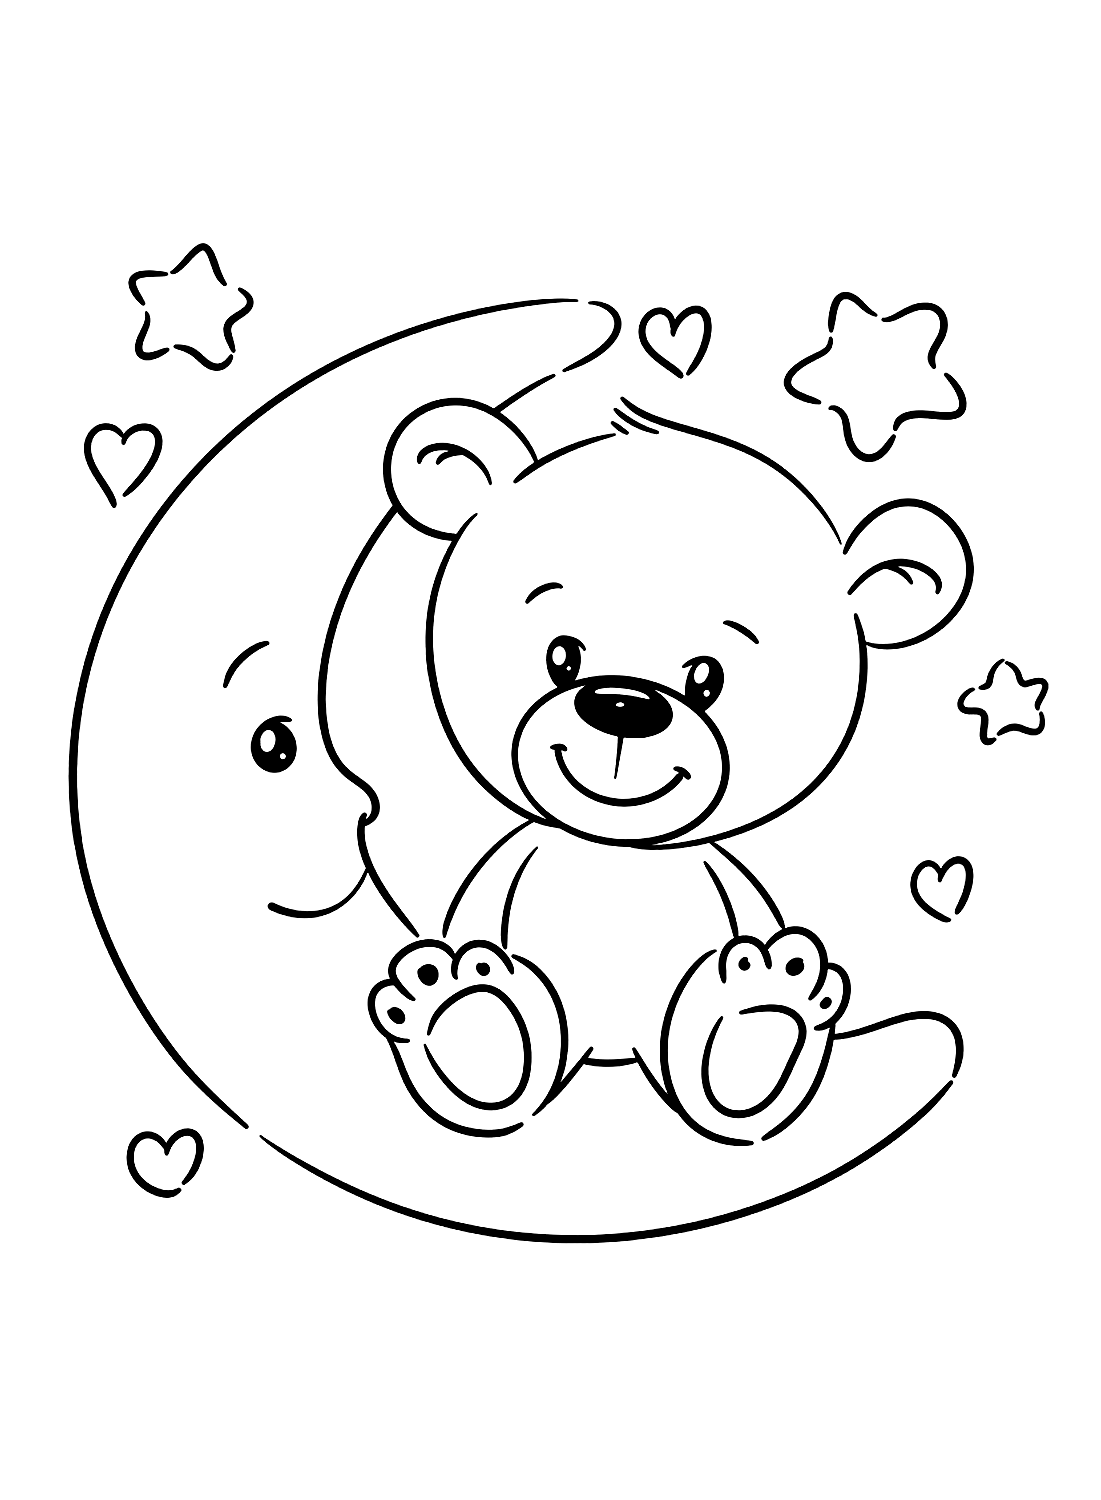 Fun moon and bear coloring pages